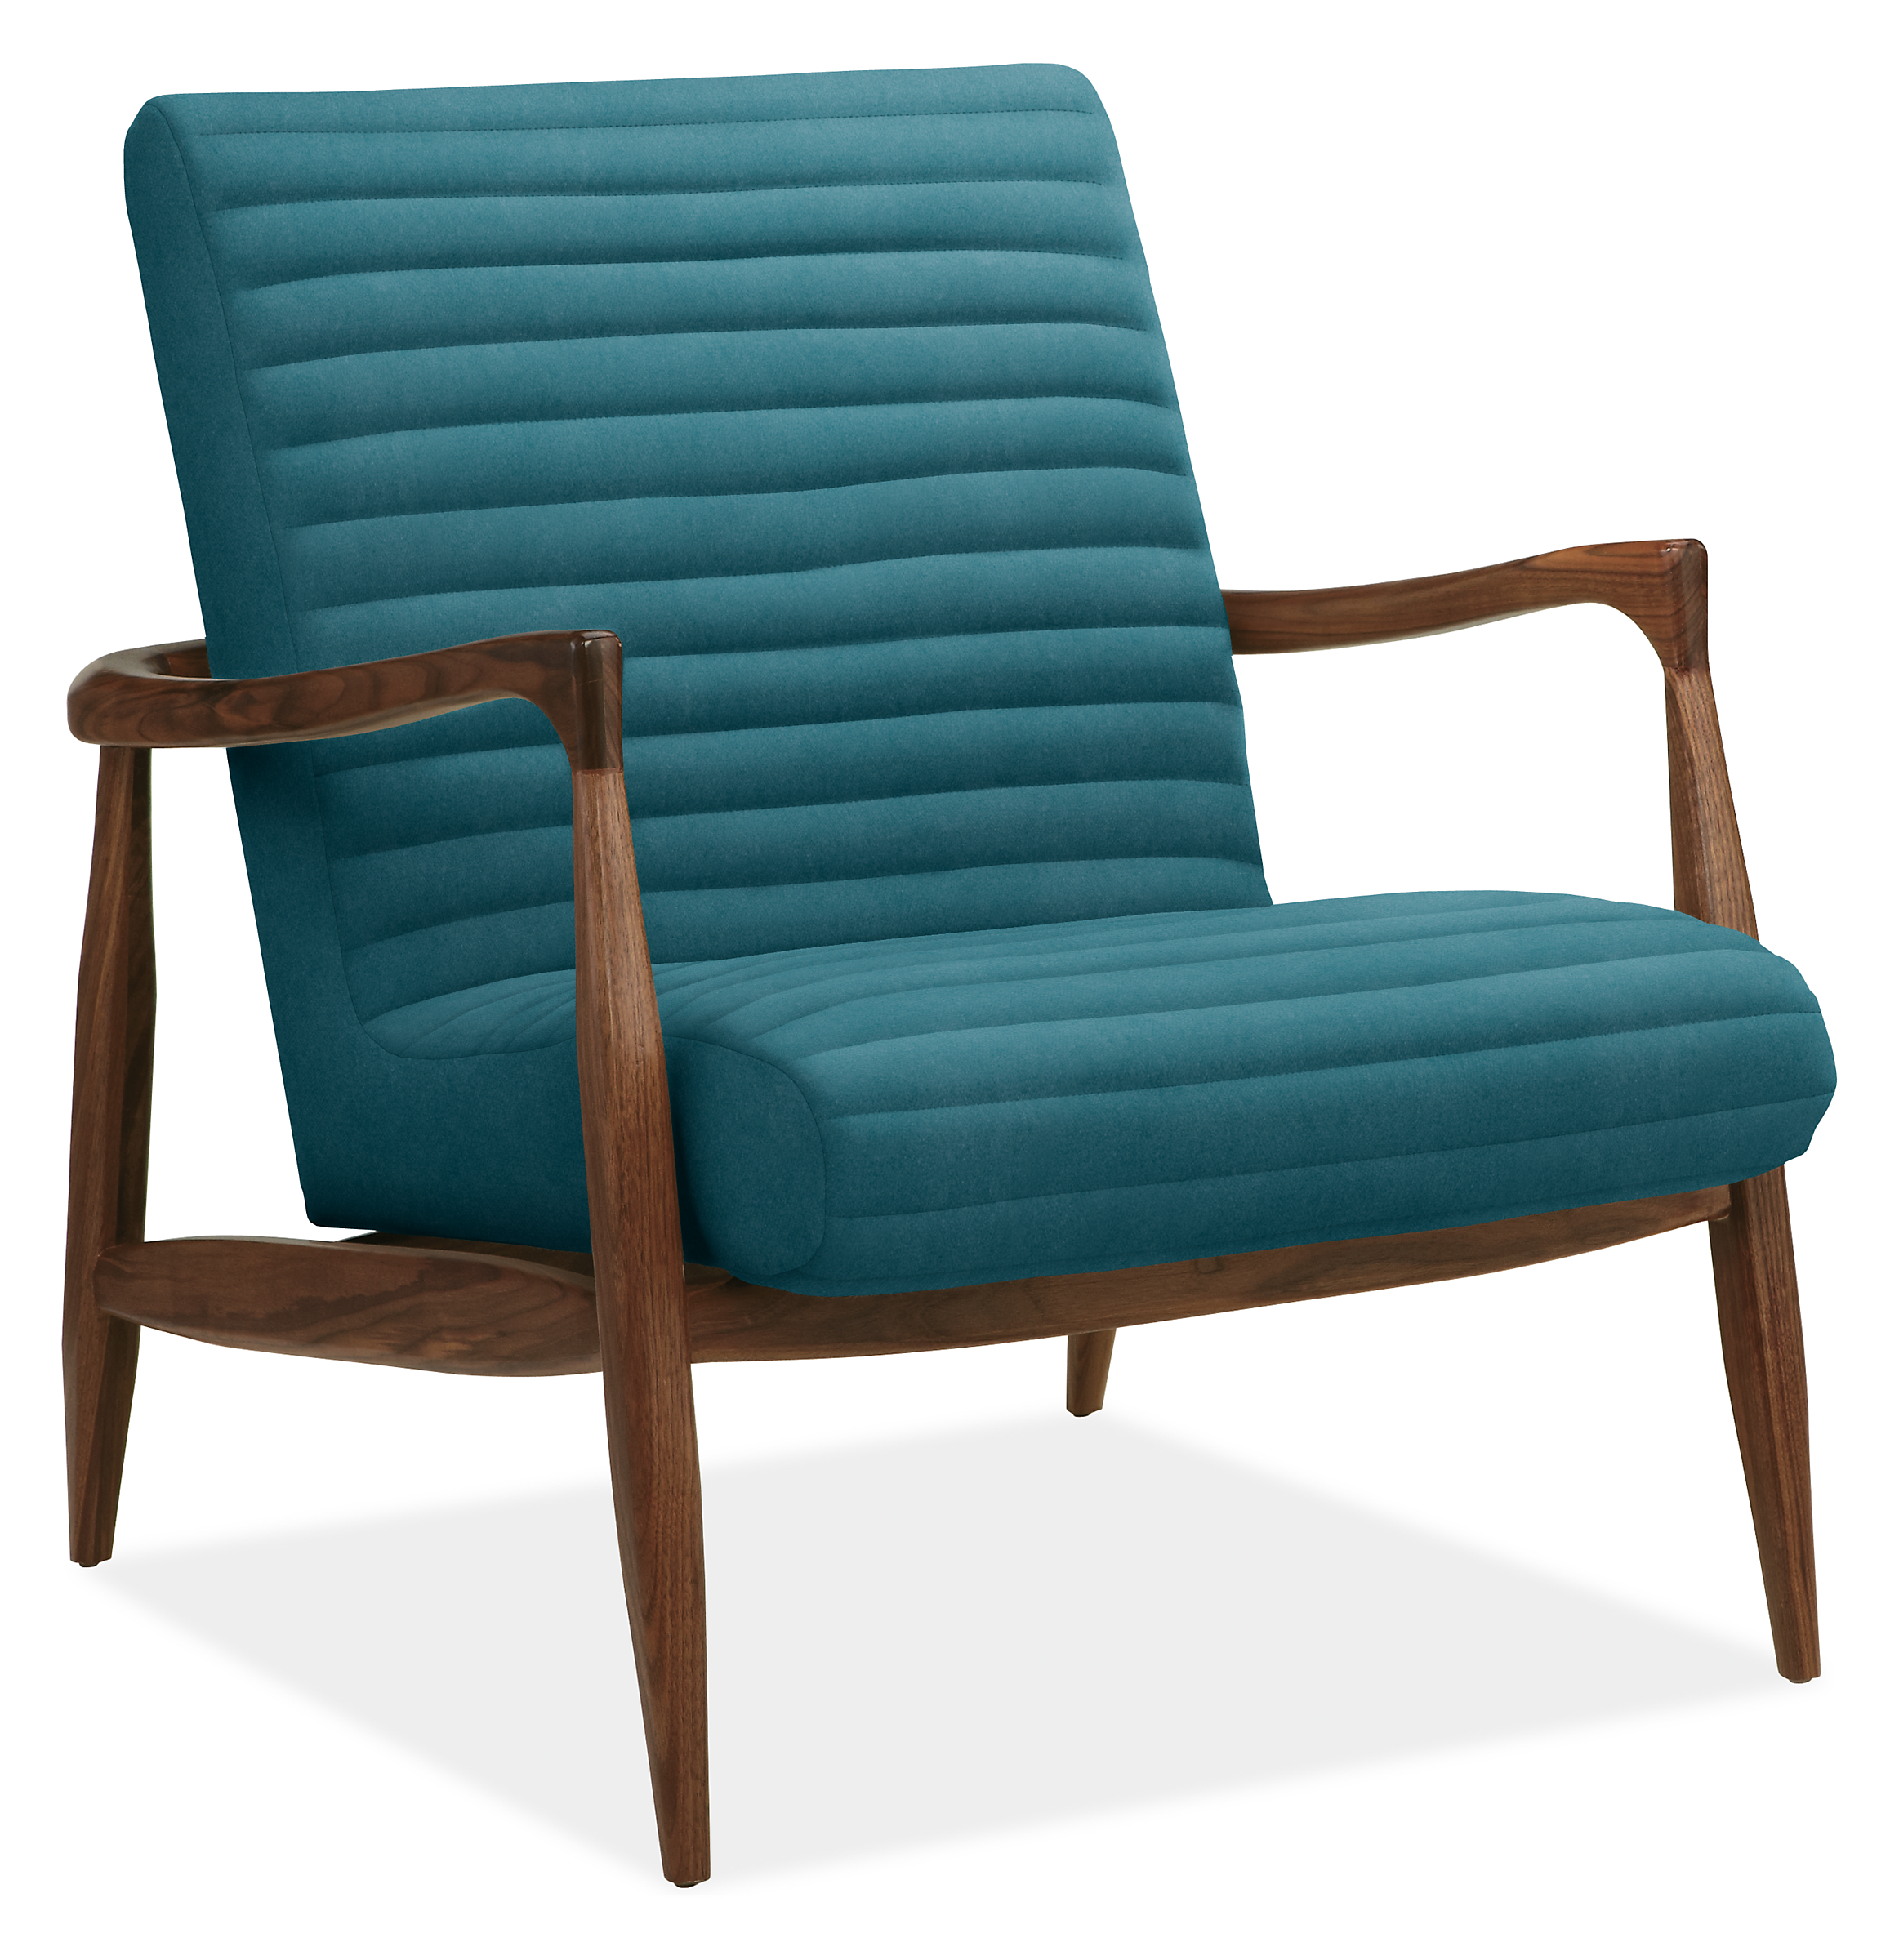 Callan Chair in Banks Lagoon with Walnut Frame